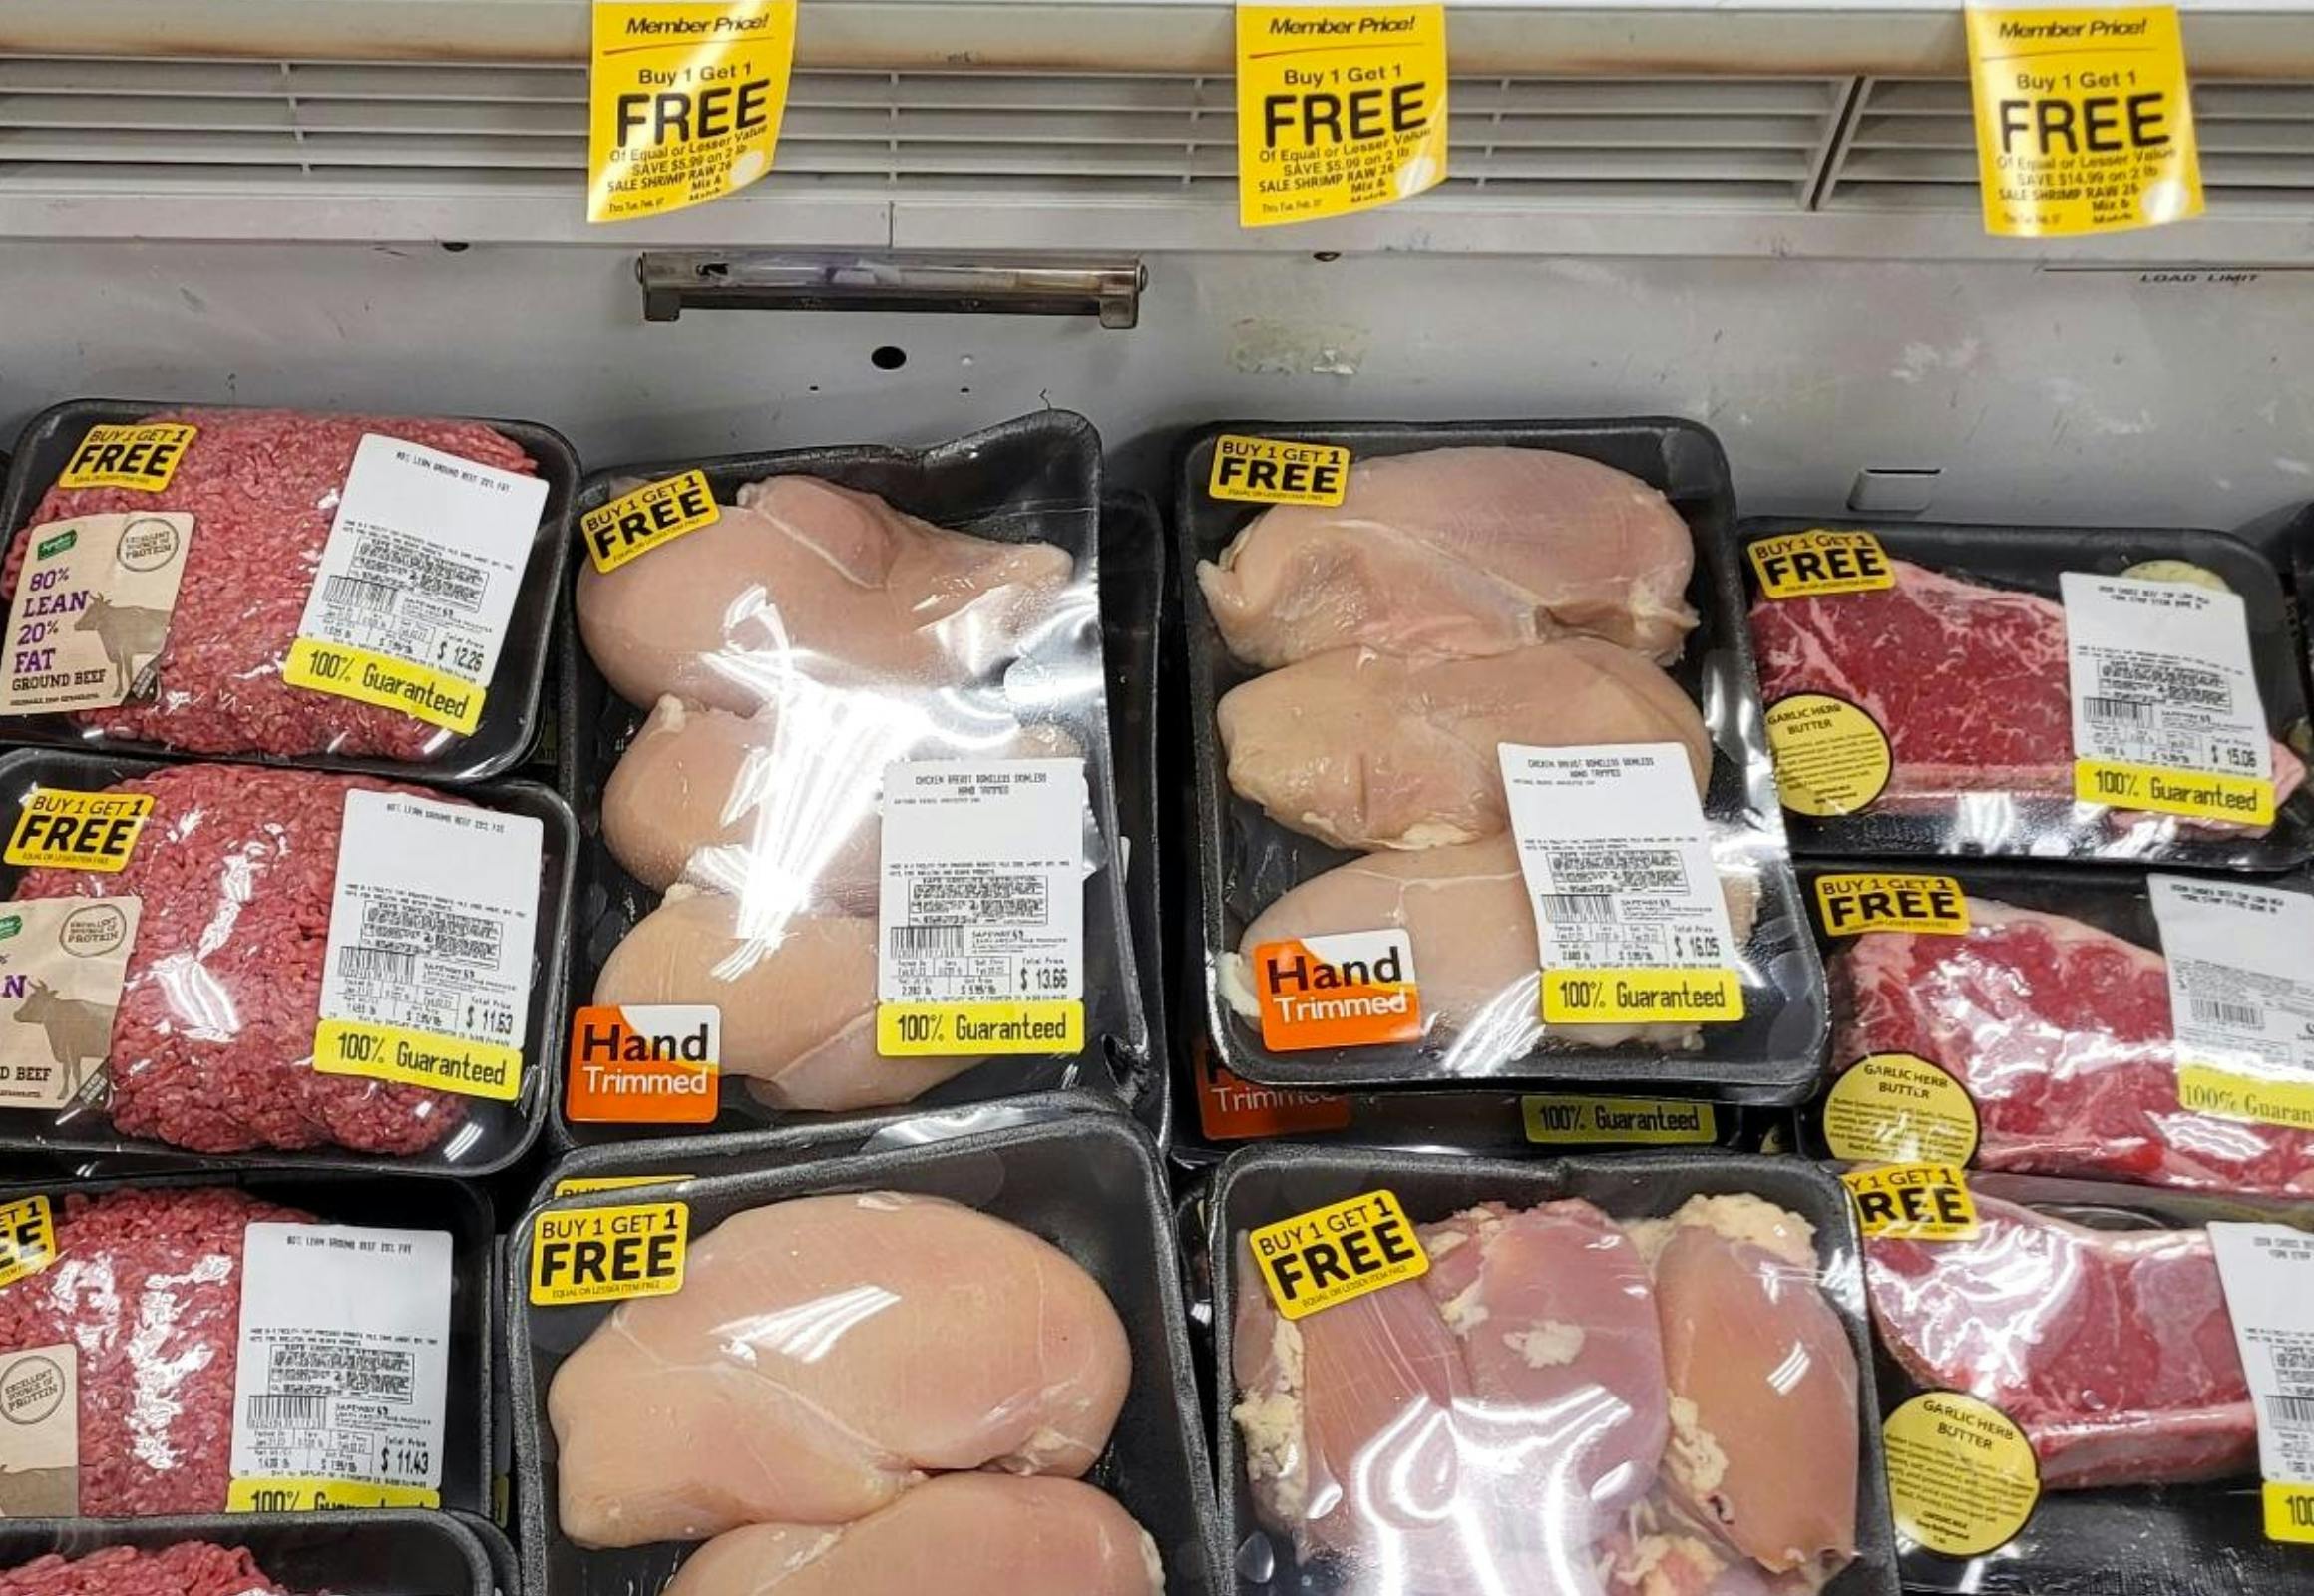 Chicken breast packages in a store fridge